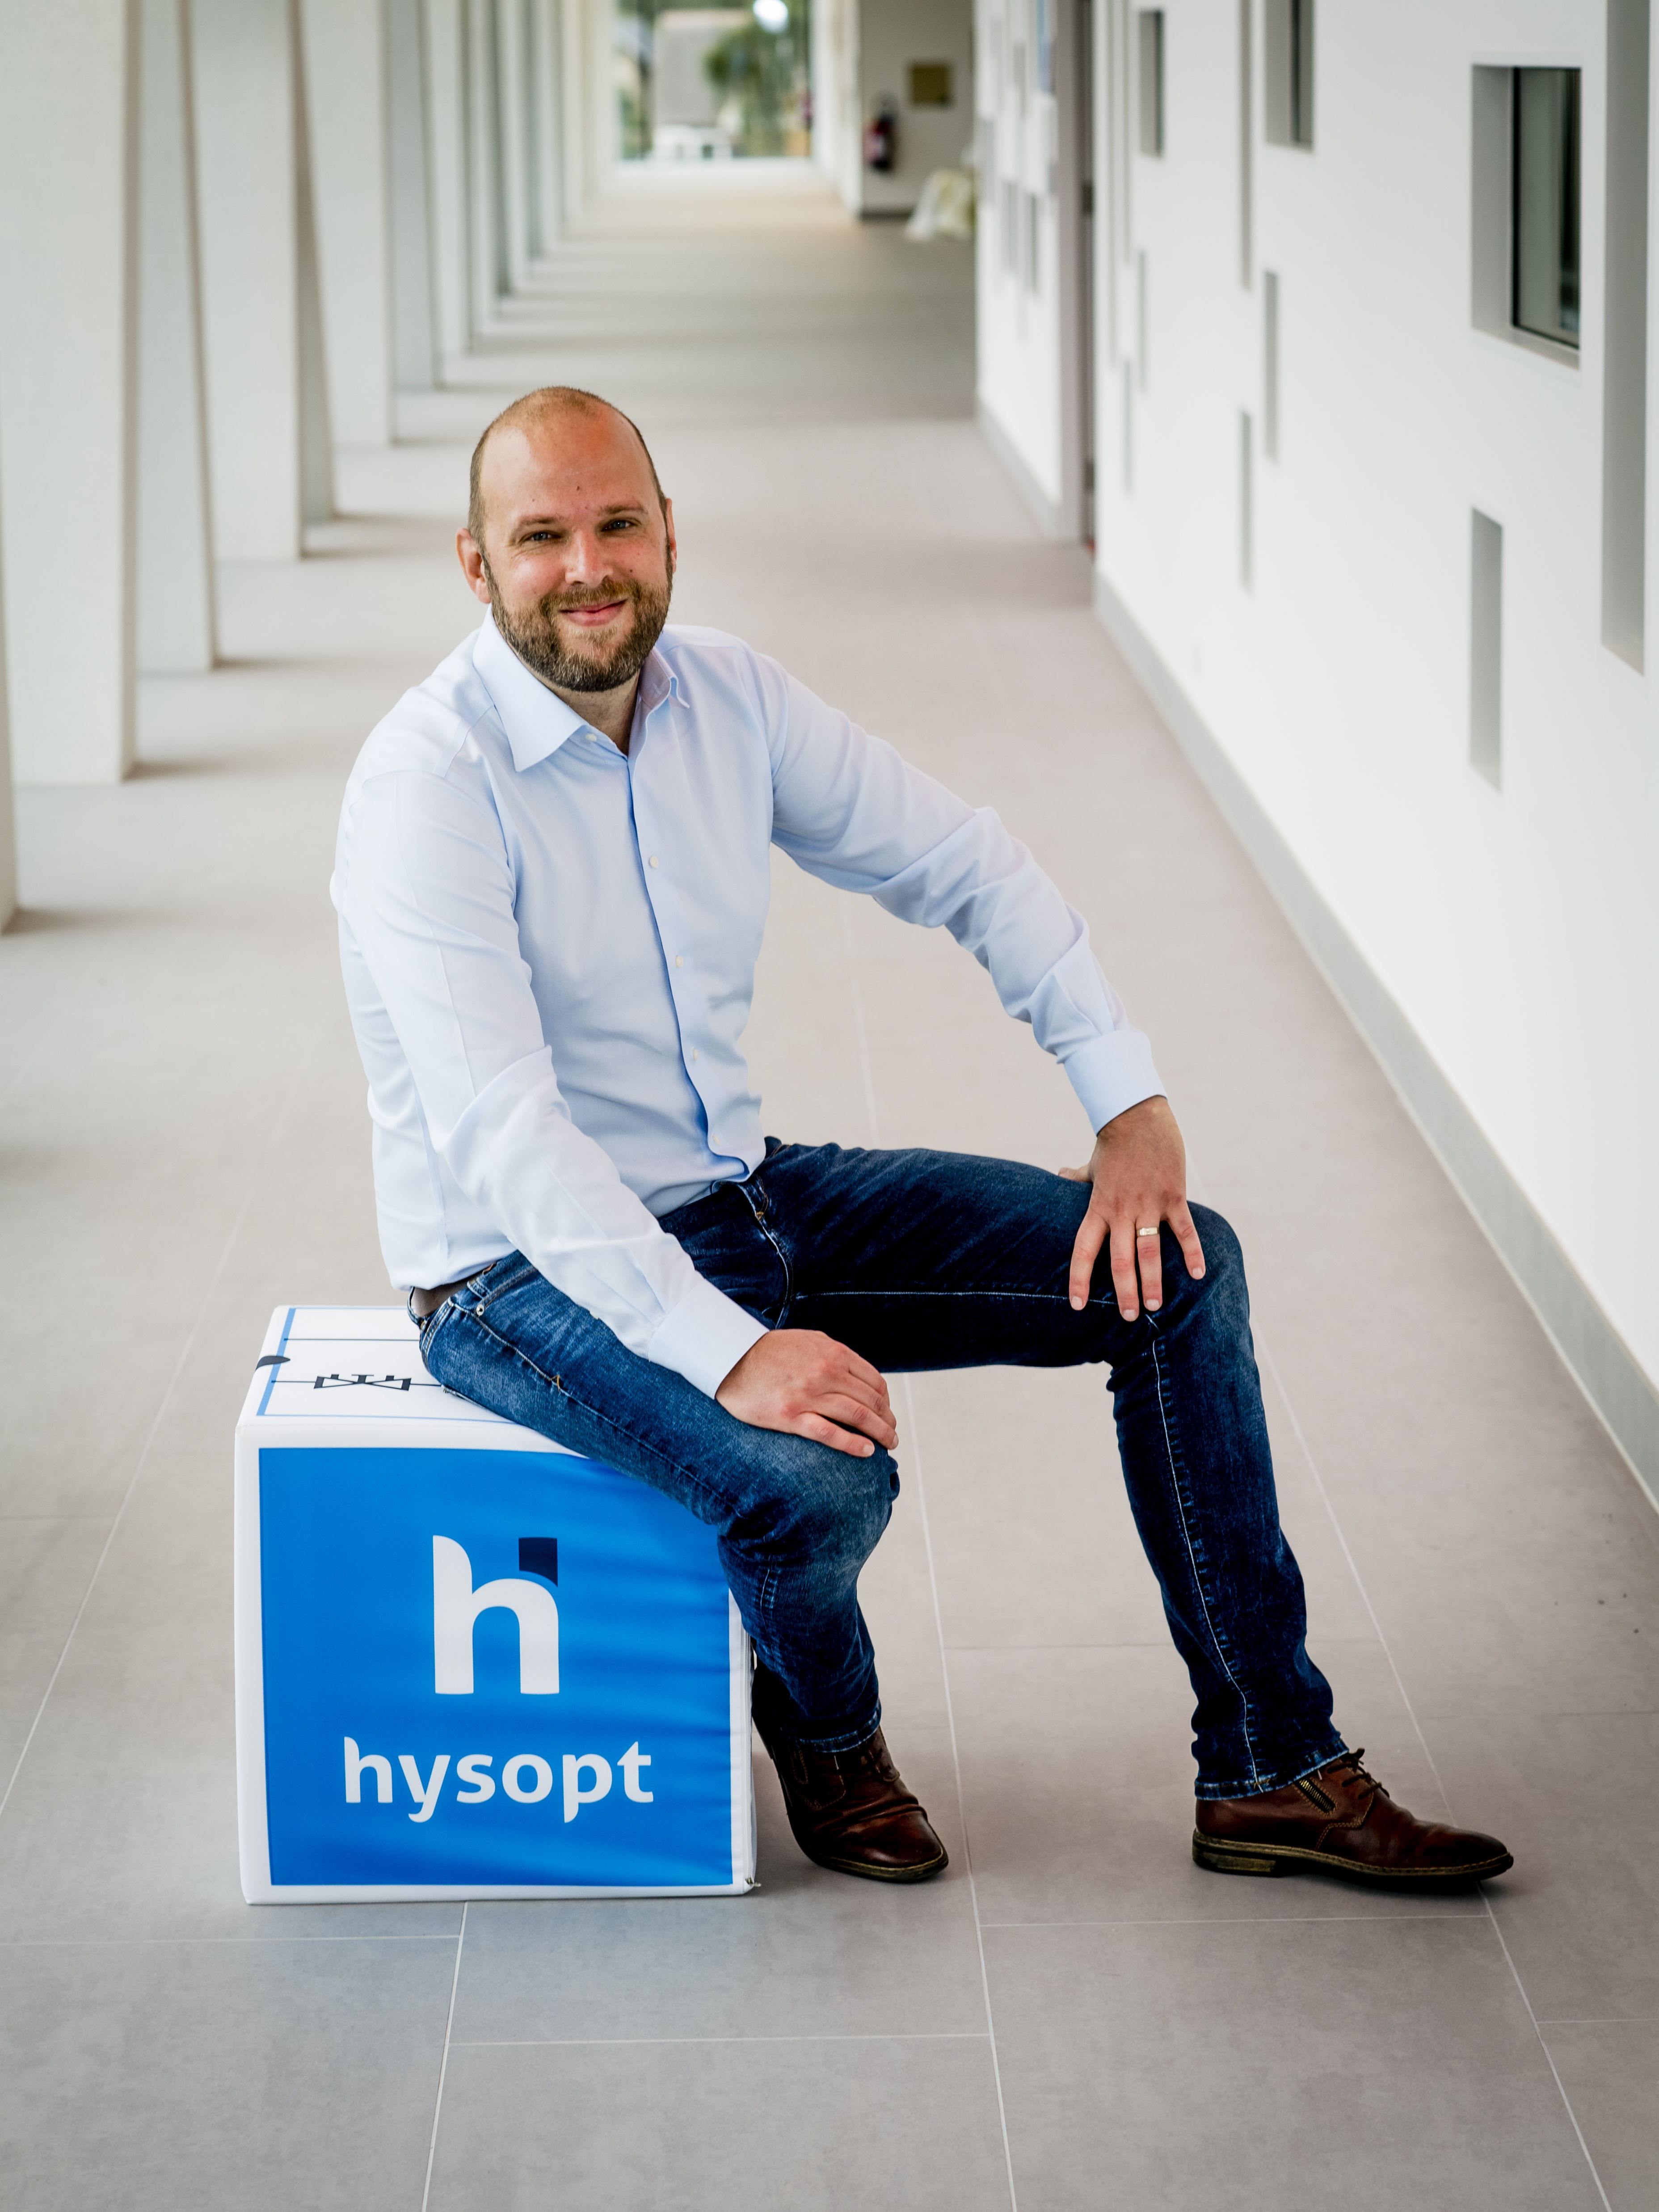 Roel Vandenbulcke, CEO and founder of Hysopt